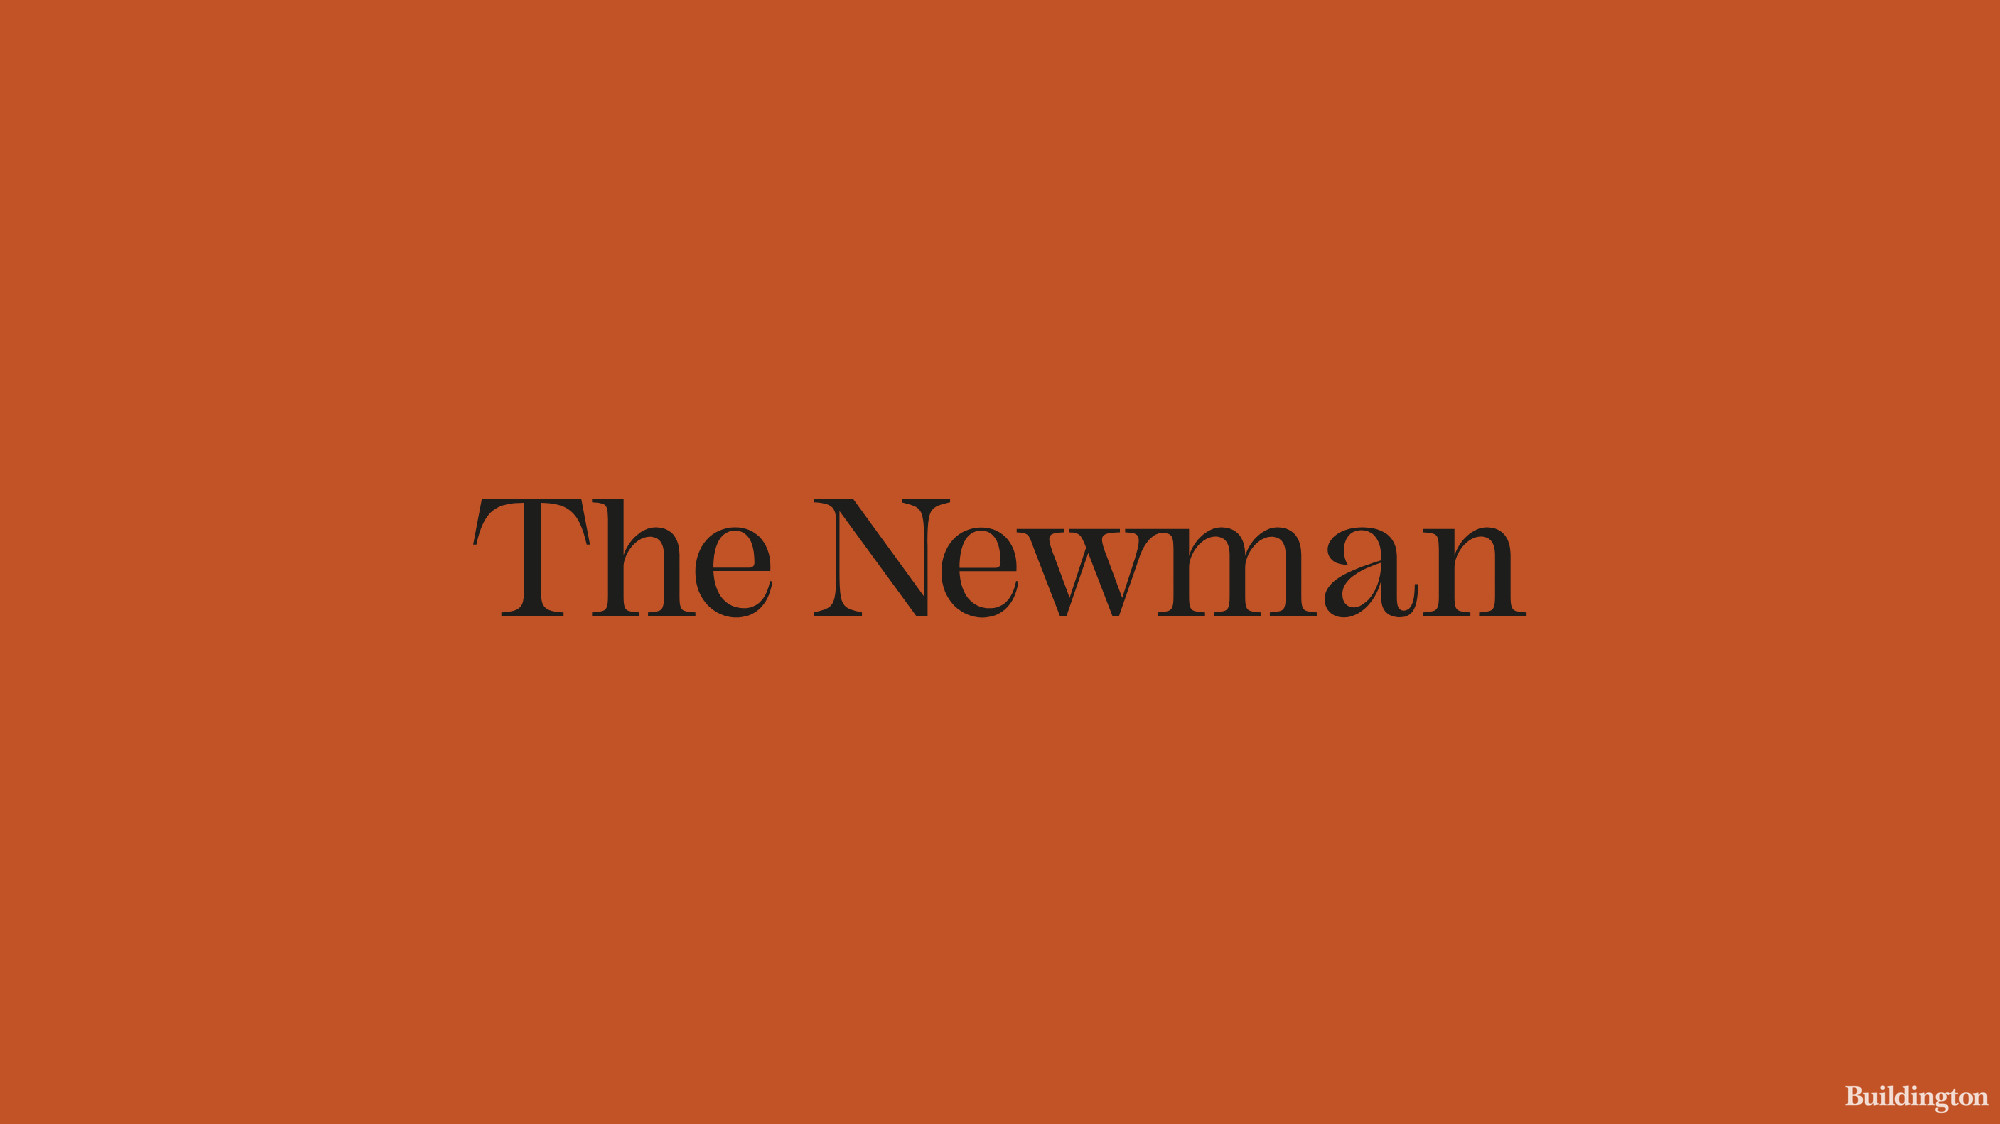 The Newman hotel development cover image